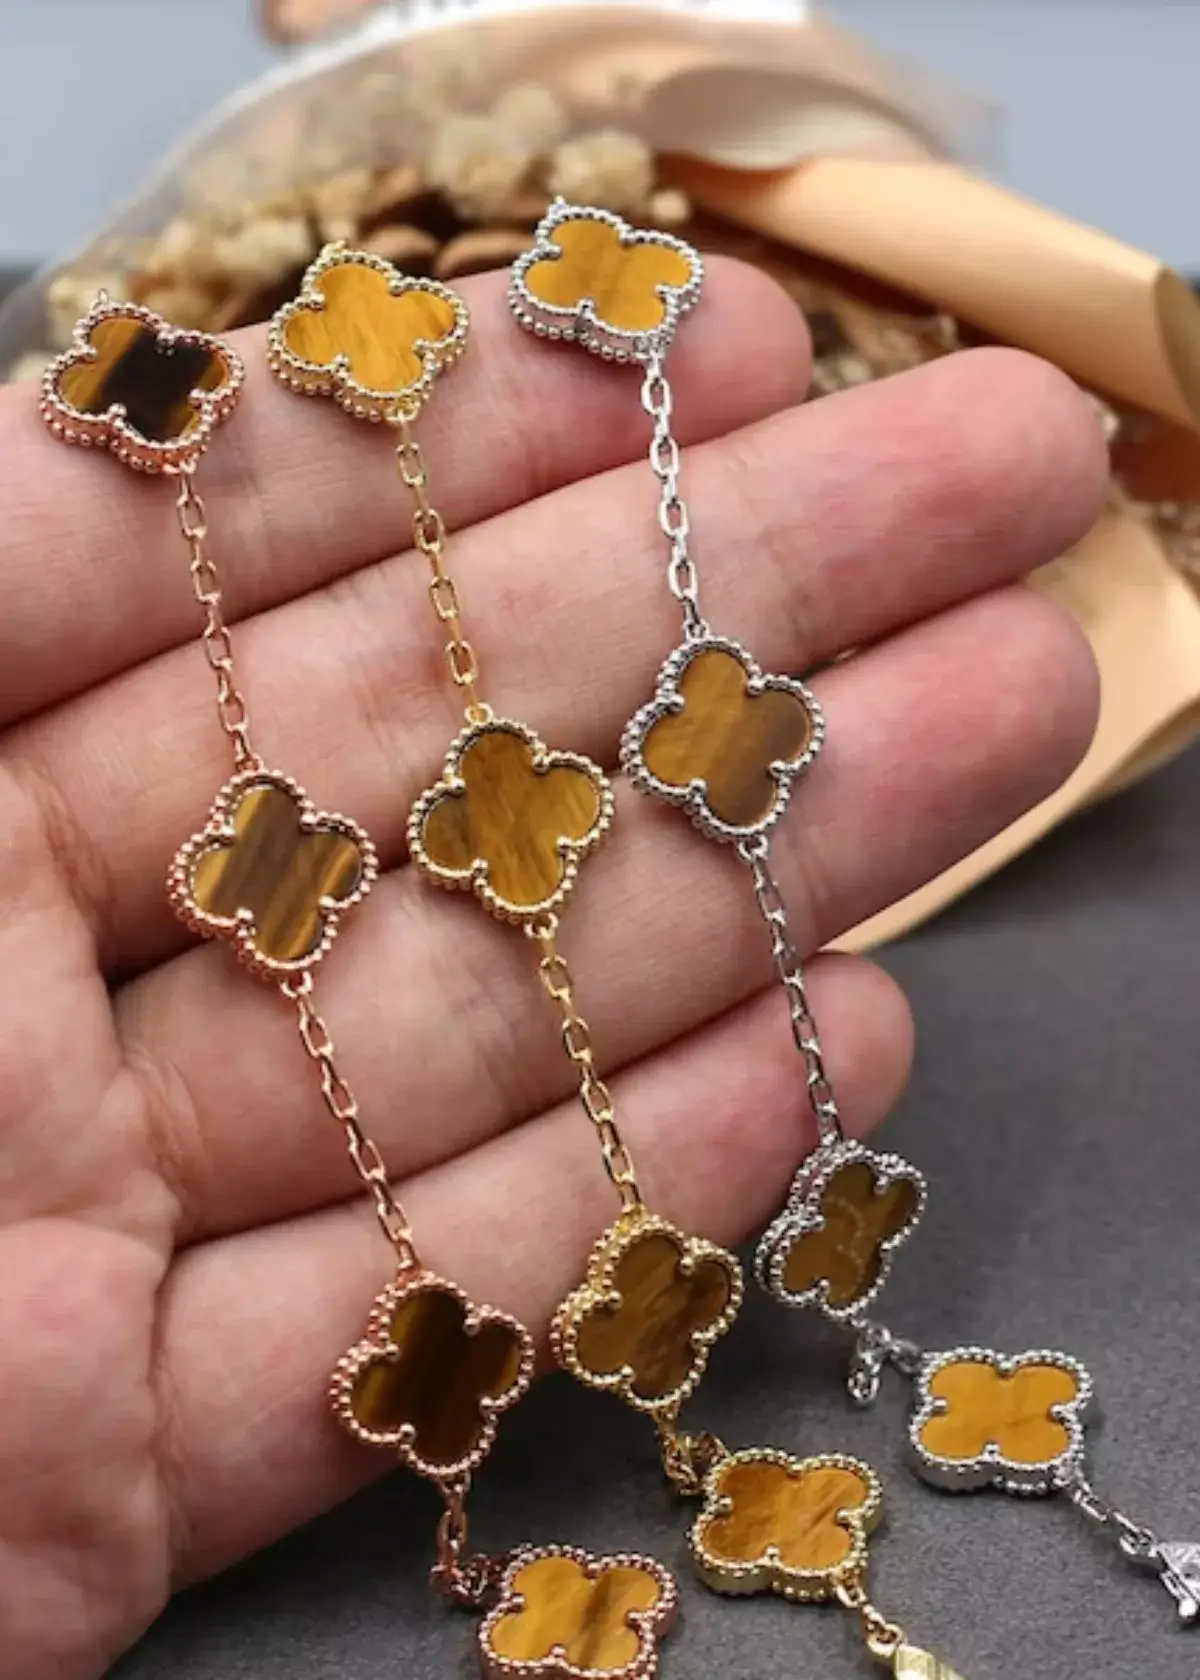 What is a Clover Bracelet?